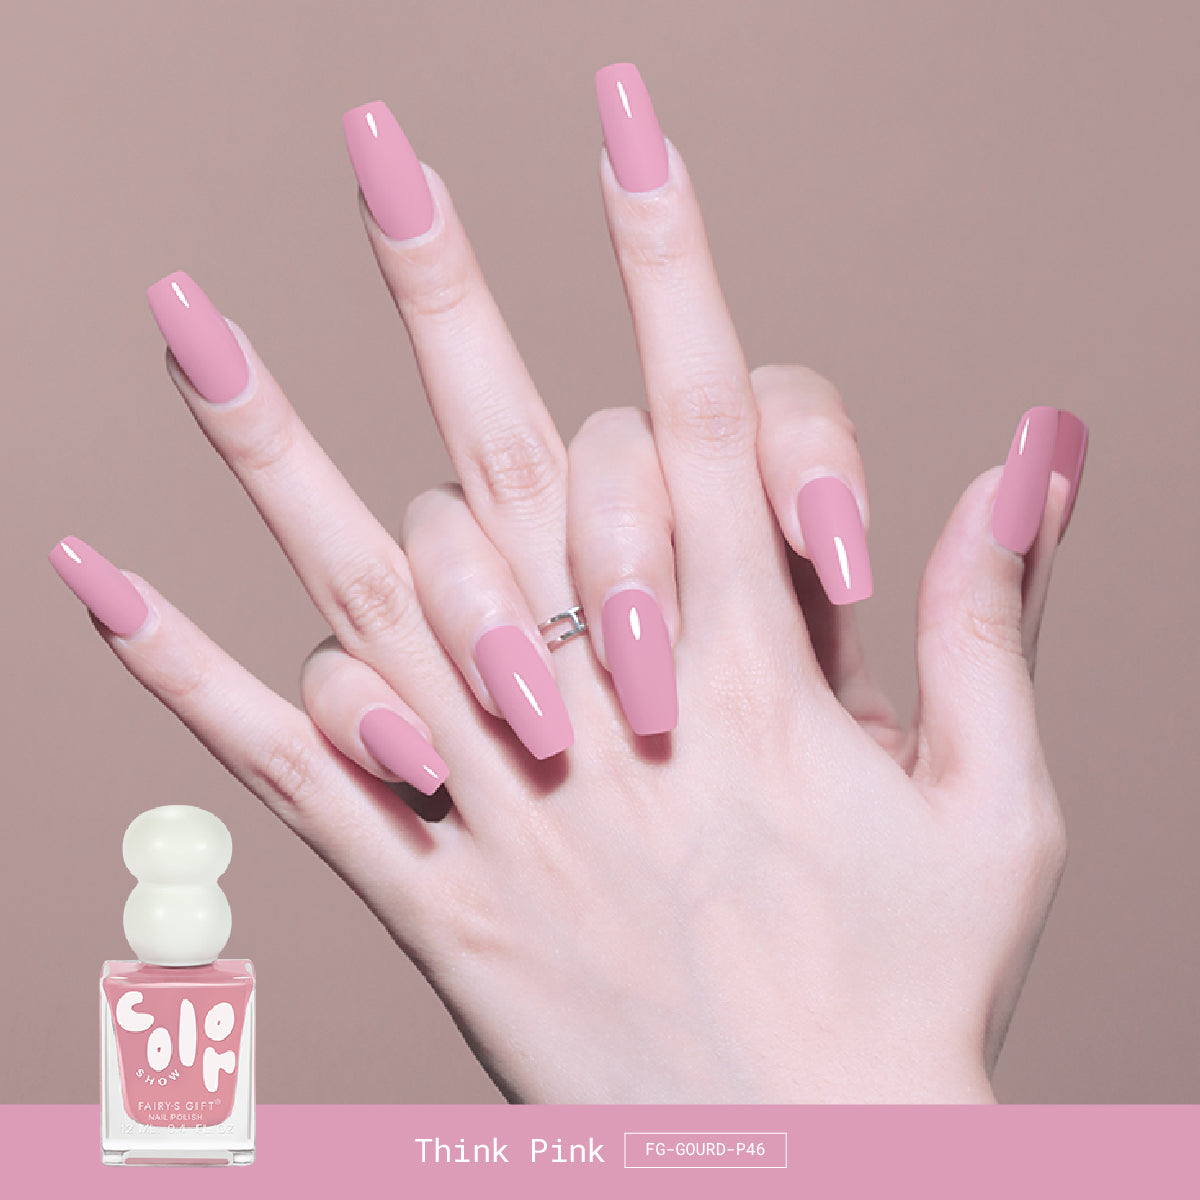 Fairy's Gift Lil's gourdie series quick dry nail polish in Think Pink colour P46